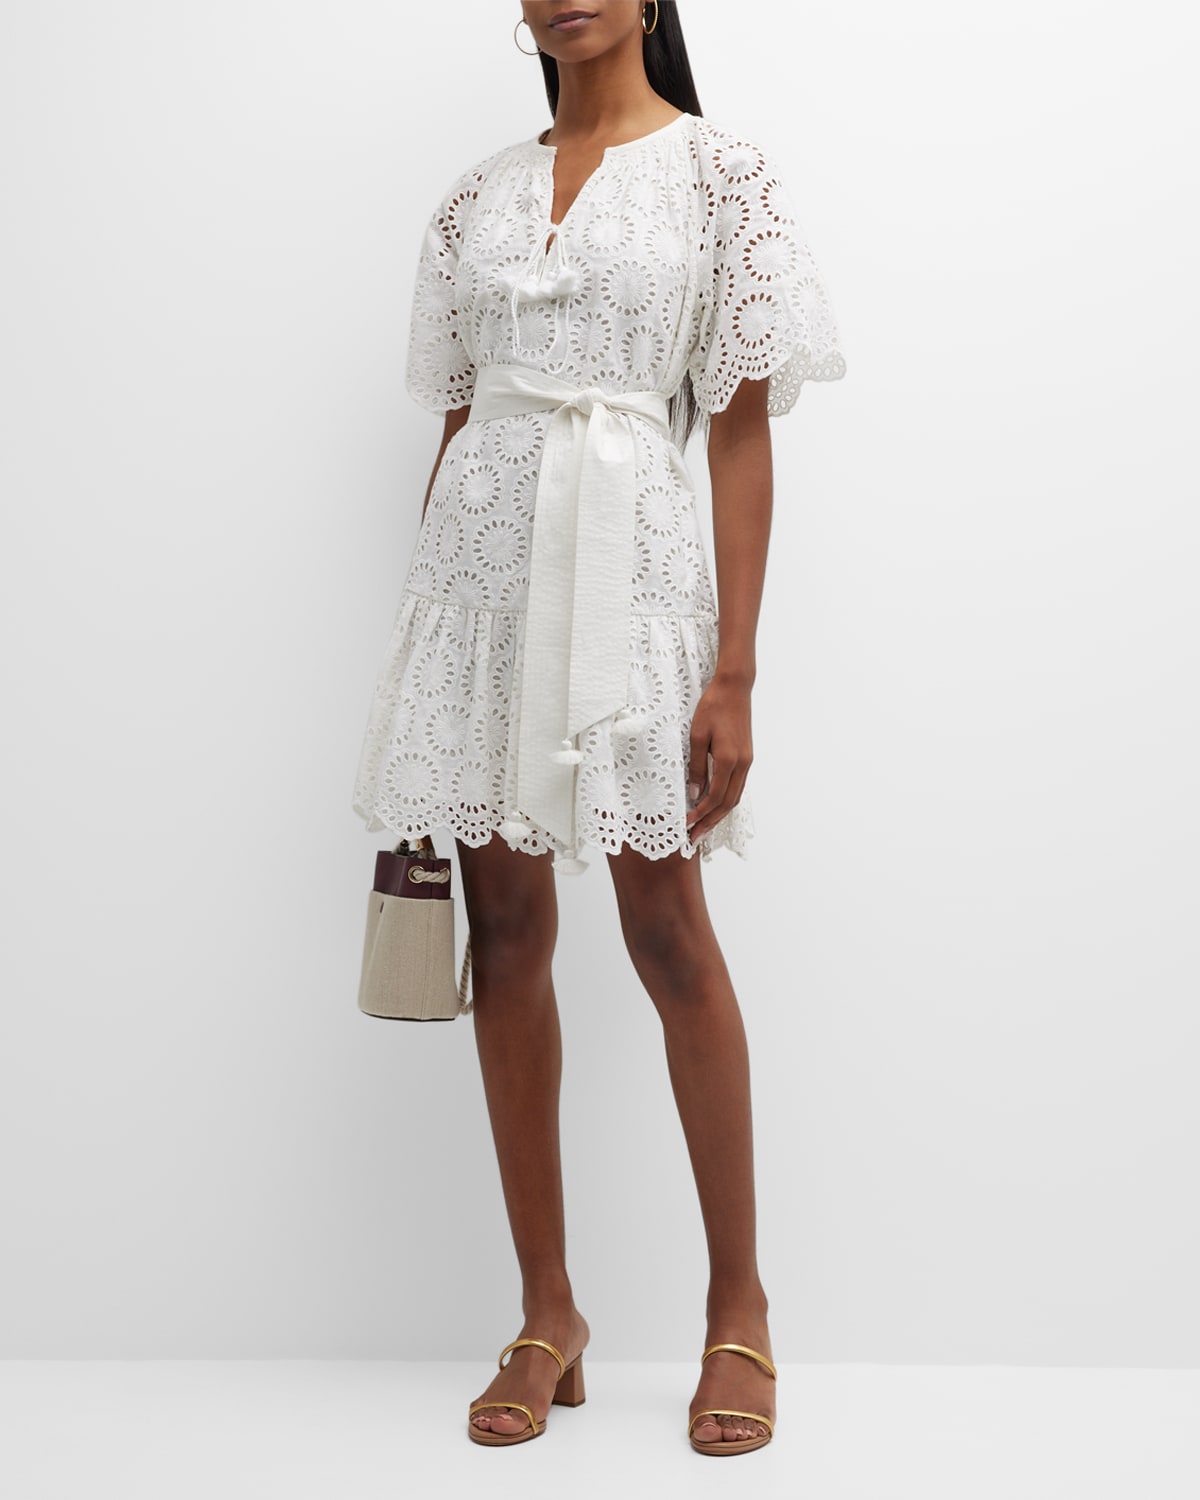 Figue Bria Eyelet Belted Mini Dress